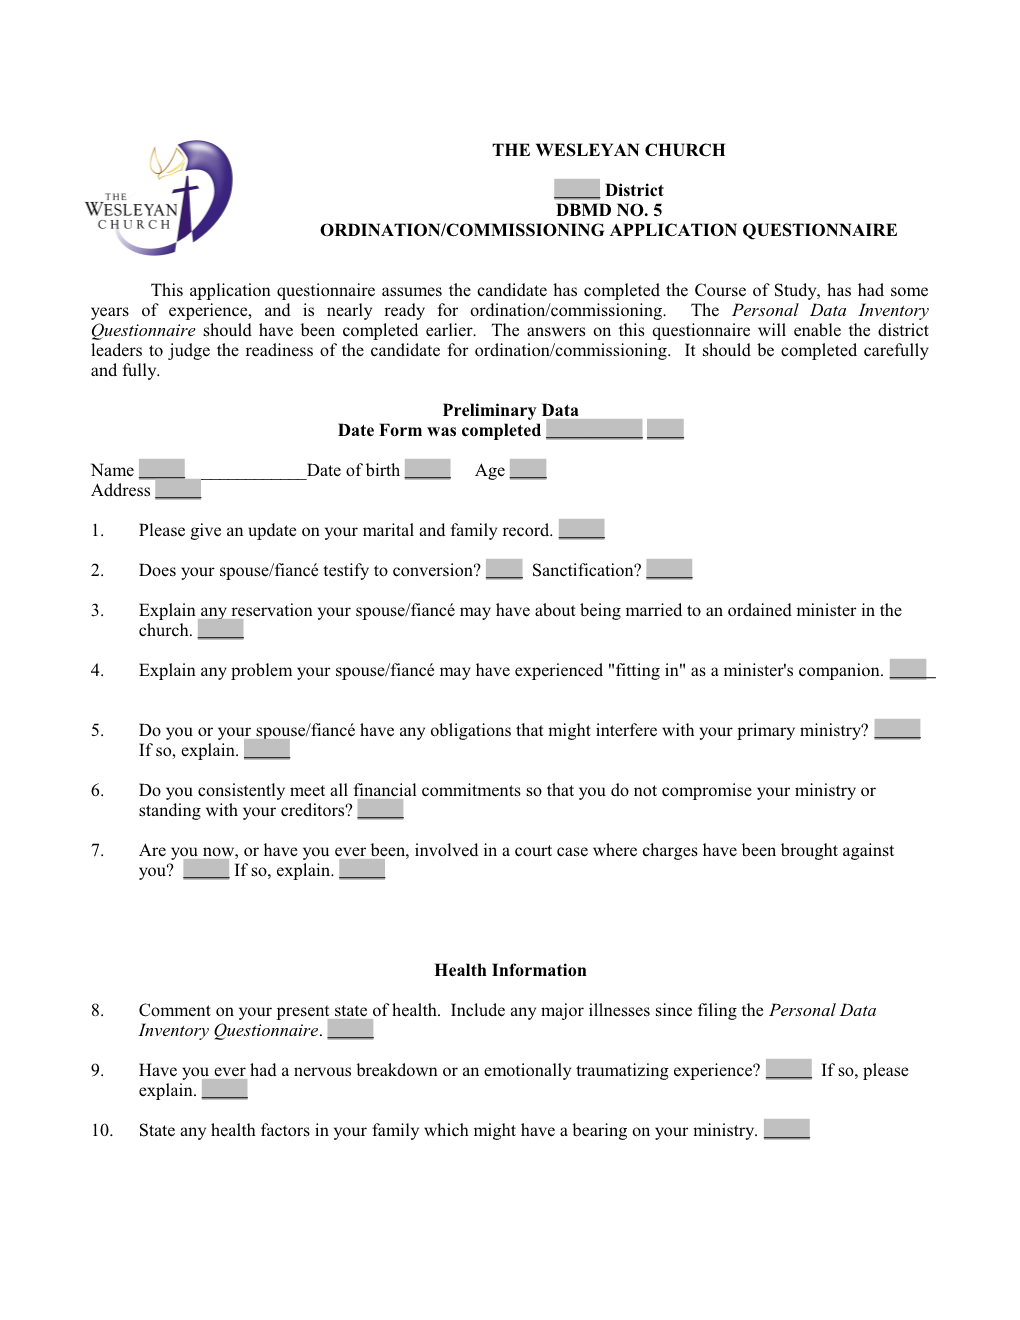 Ordination/Commissioning Application Questionnaire